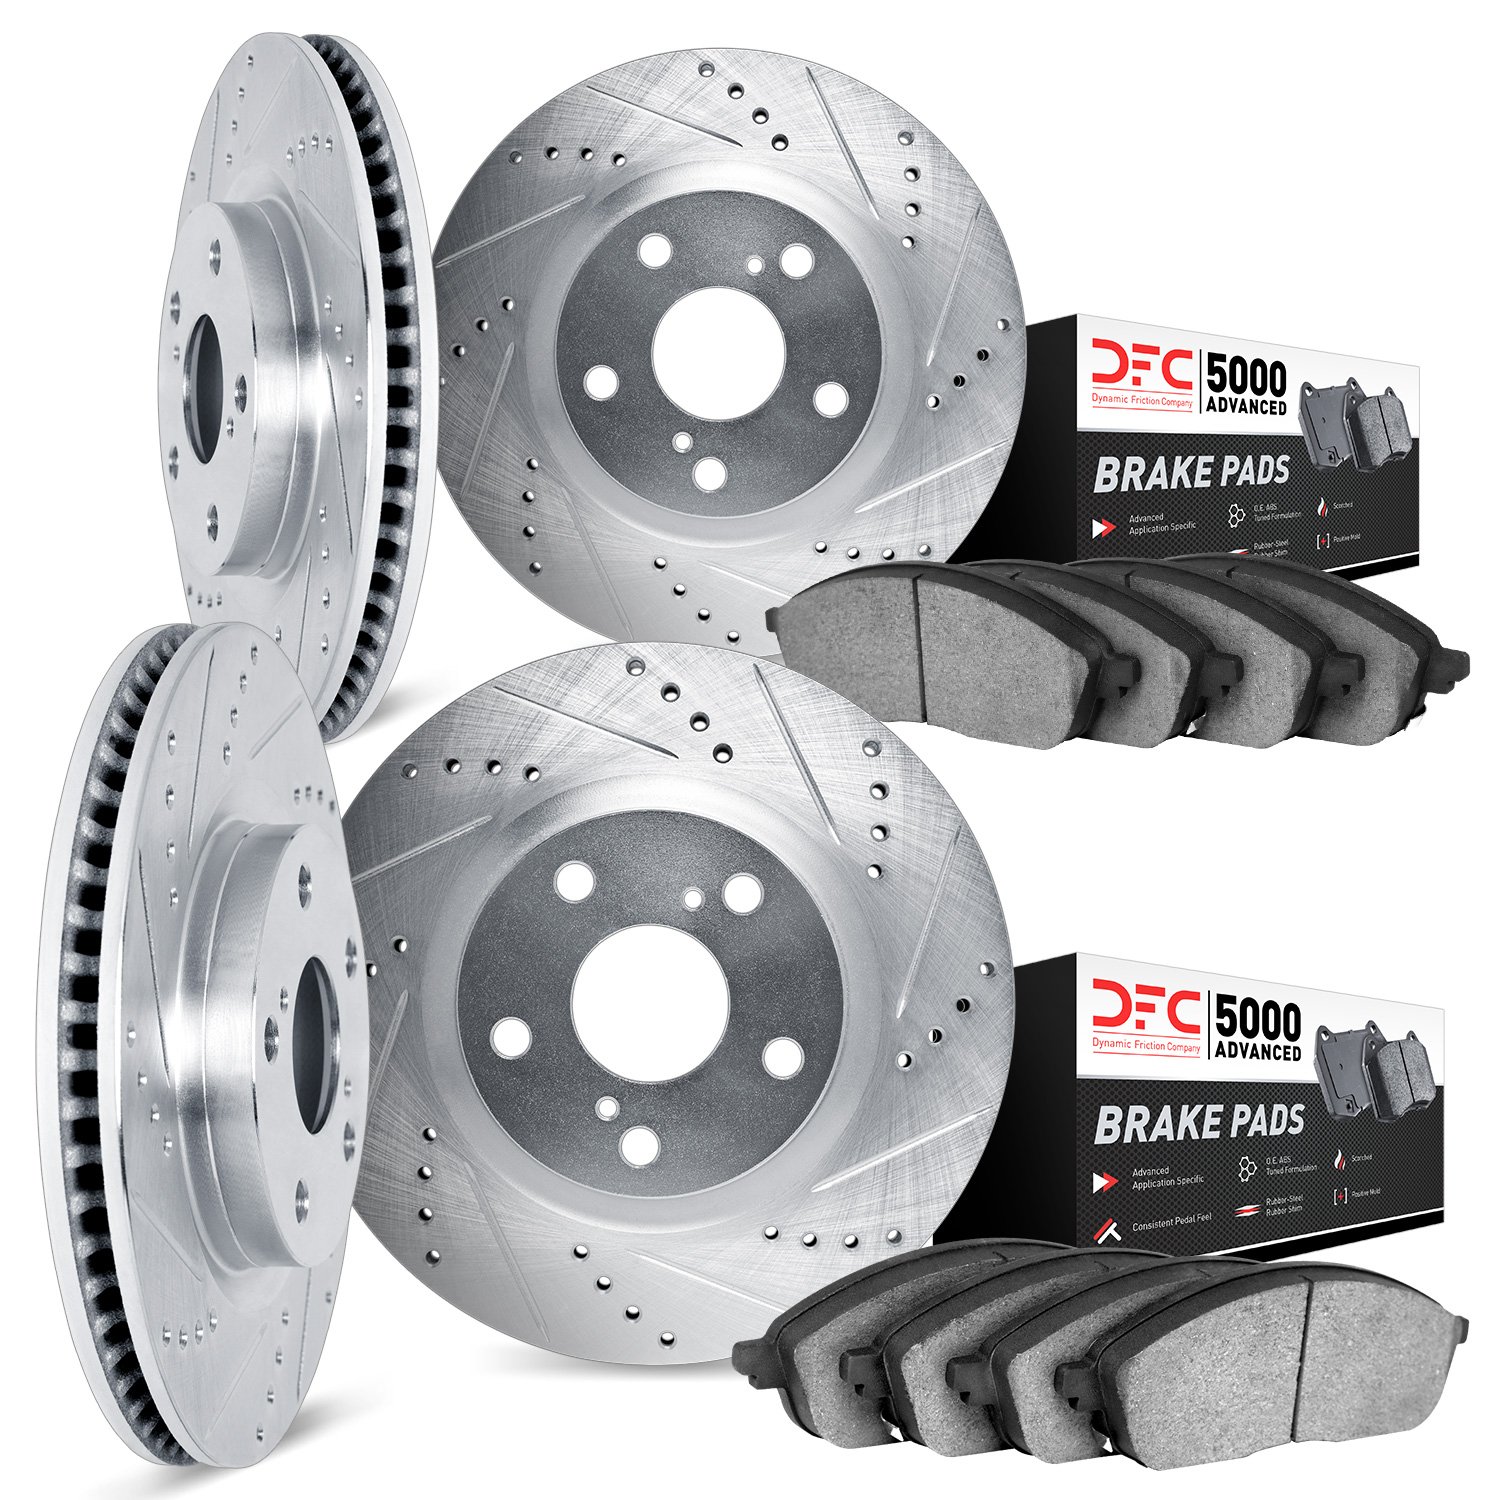 7504-48004 Drilled/Slotted Brake Rotors w/5000 Advanced Brake Pads Kit [Silver], 1997-2005 GM, Position: Front and Rear